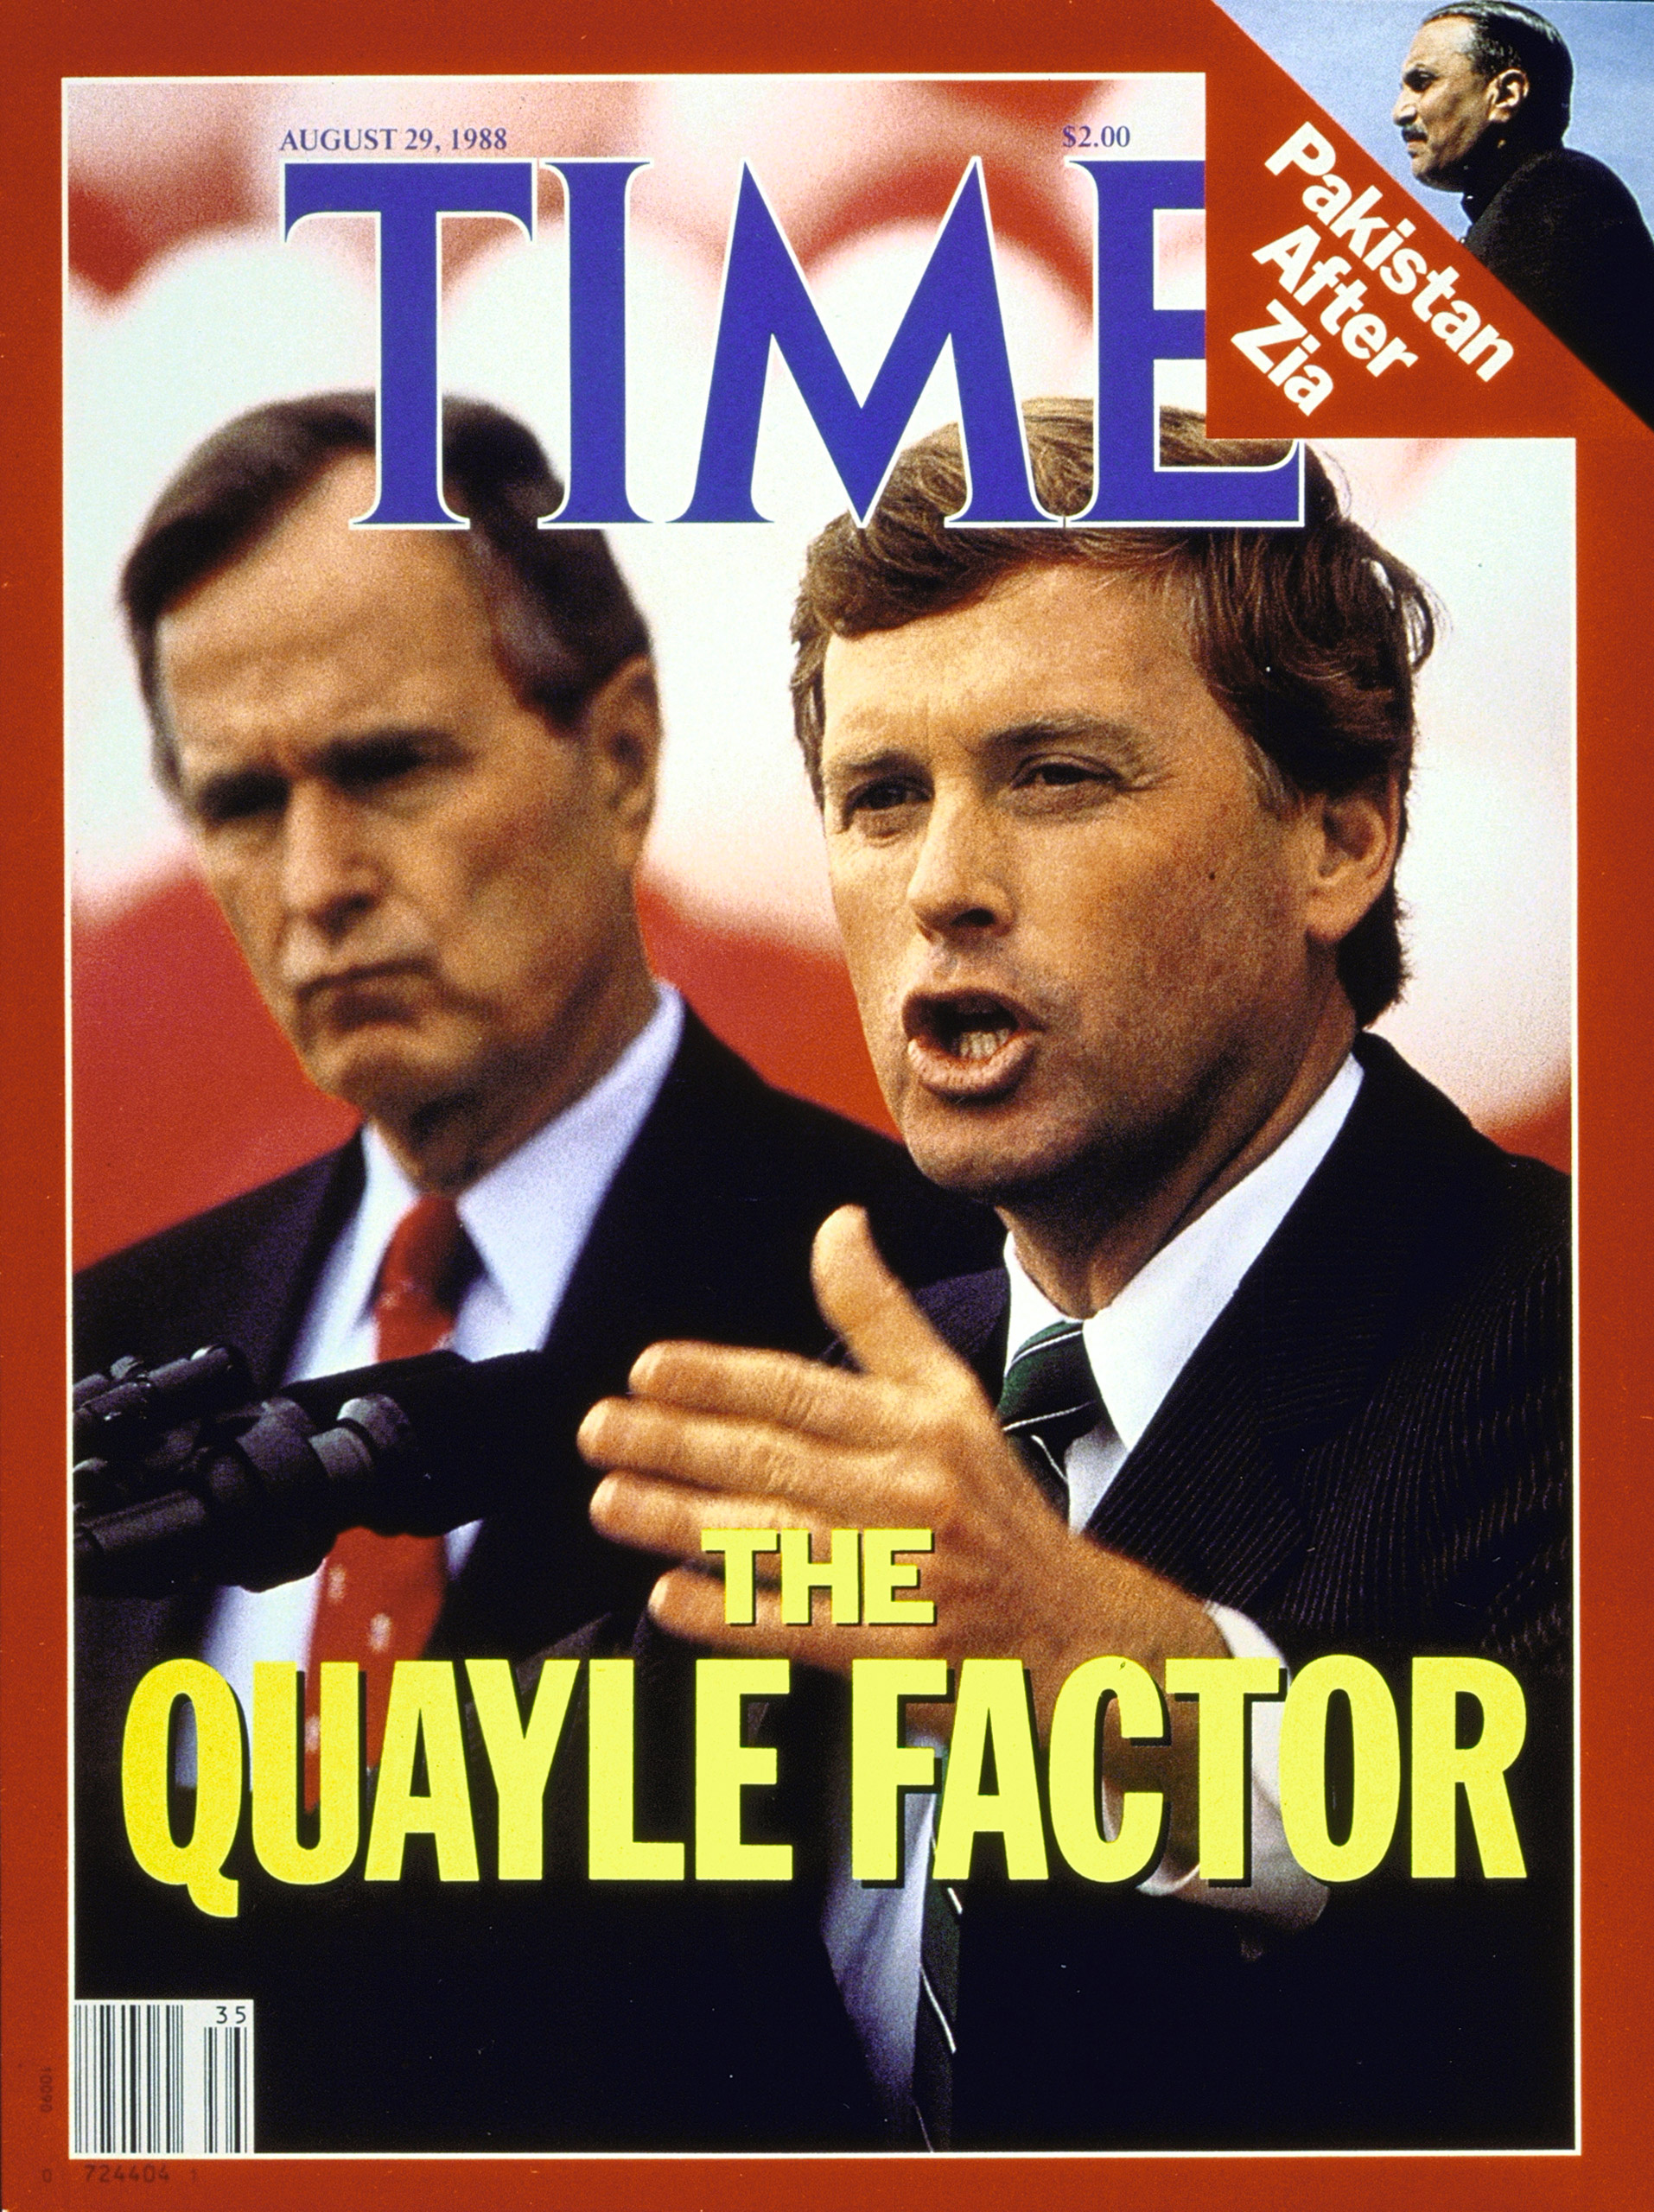 George H.W. Bush and Dan Quayle on the Aug. 29, 1988, cover of TIME. Cover photo by Dennis Brack.